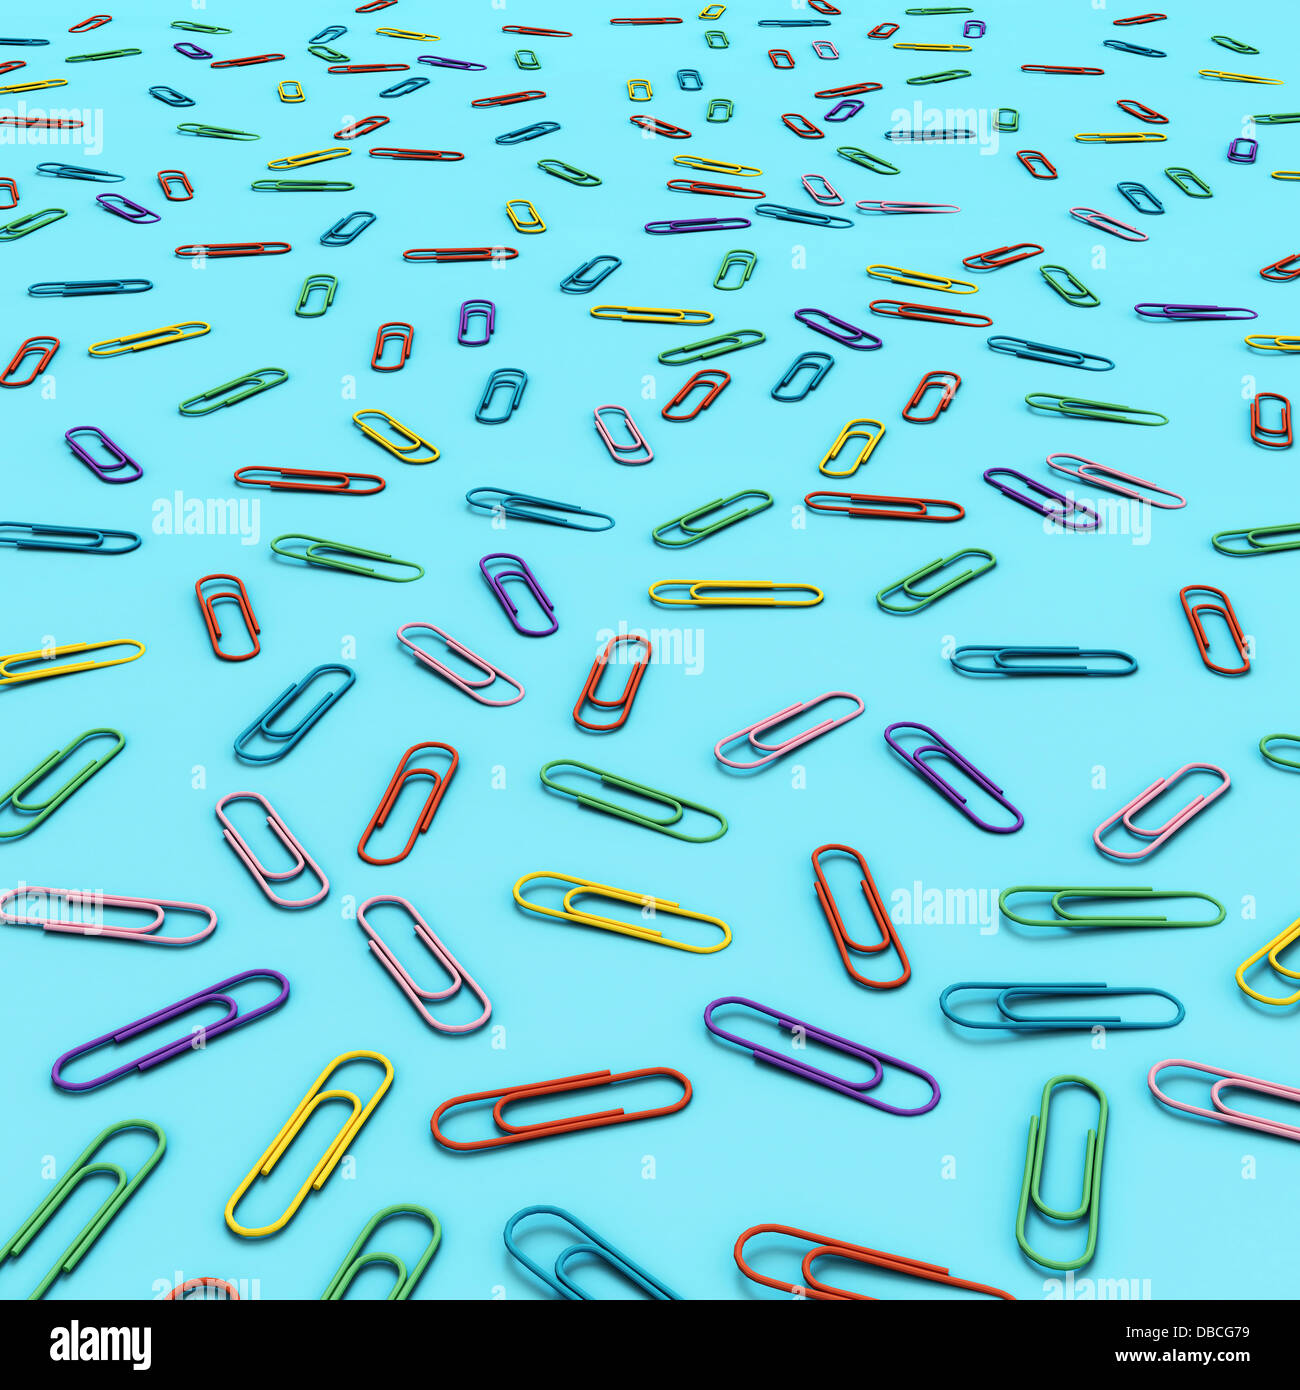 Illustration of various multi colored paper clips over blue background Stock Photo